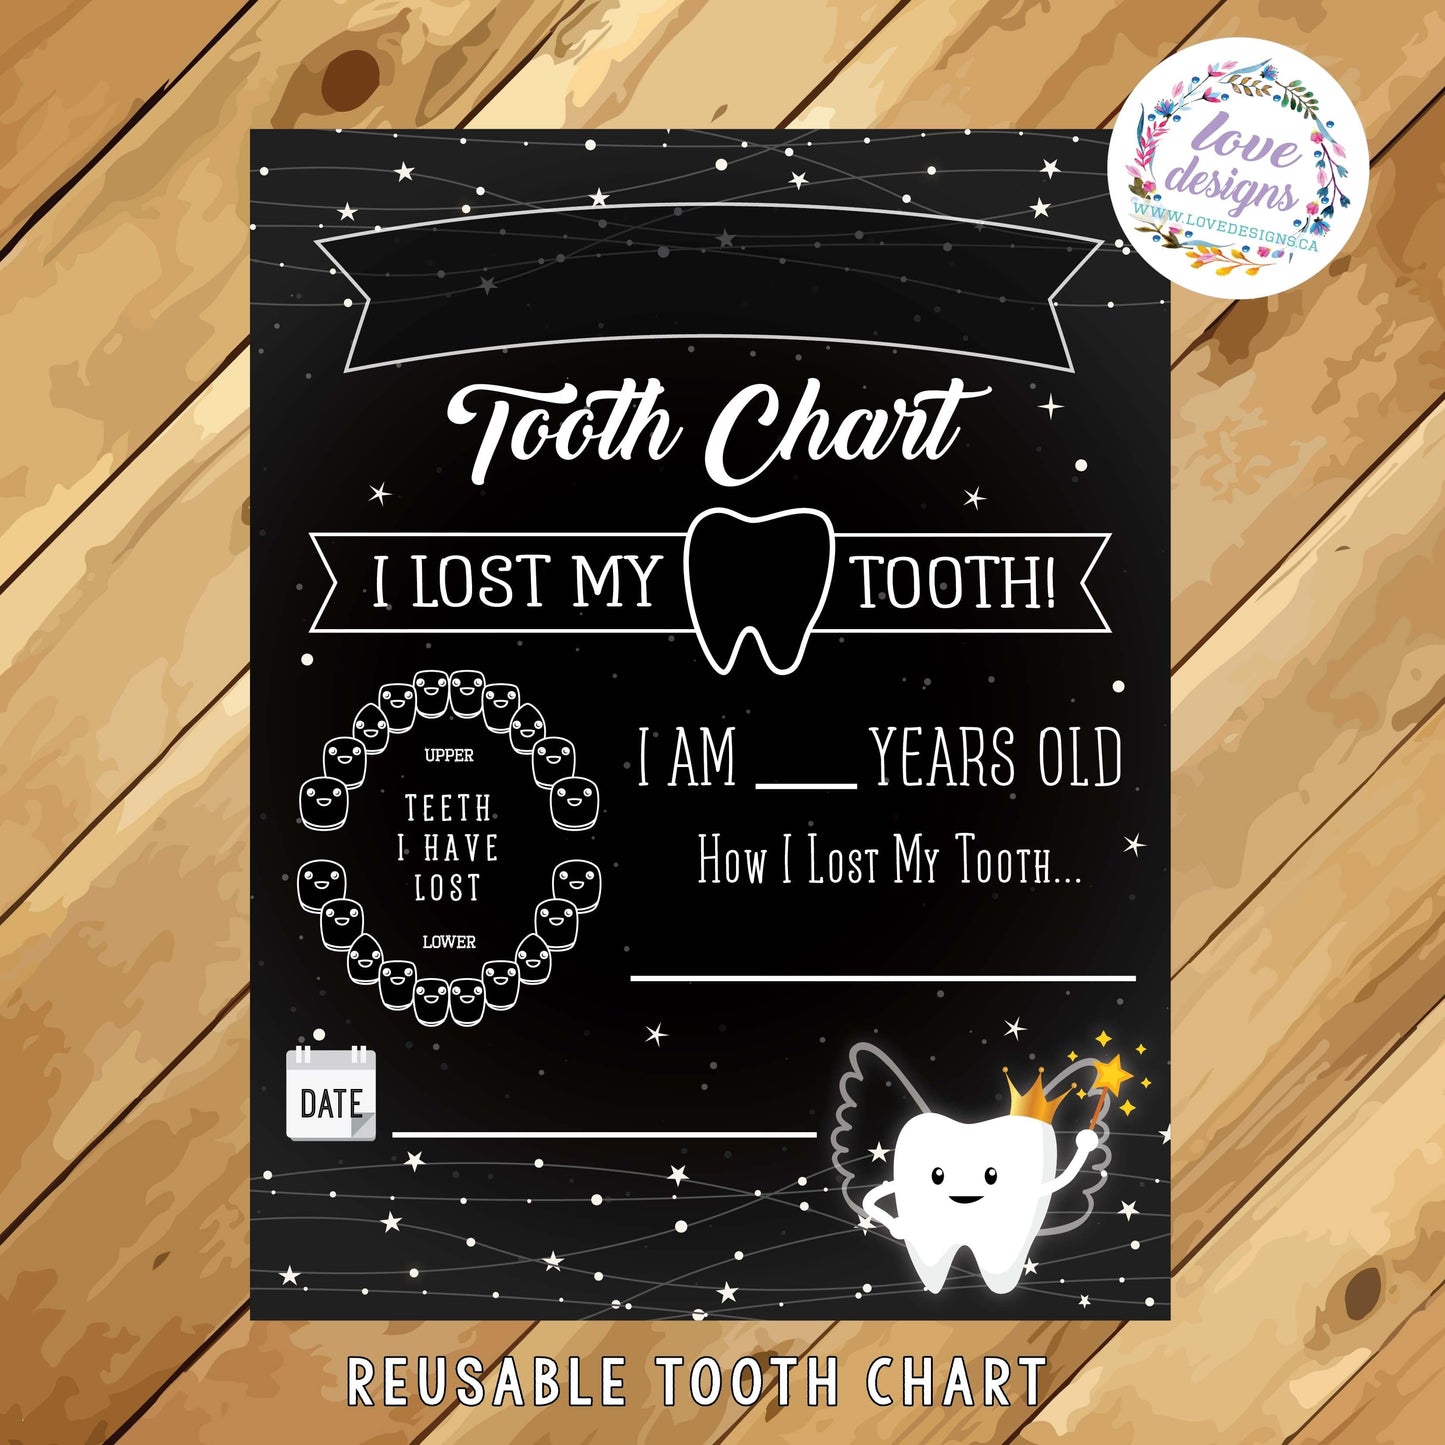 Love Designs Tooth Tracker Chart